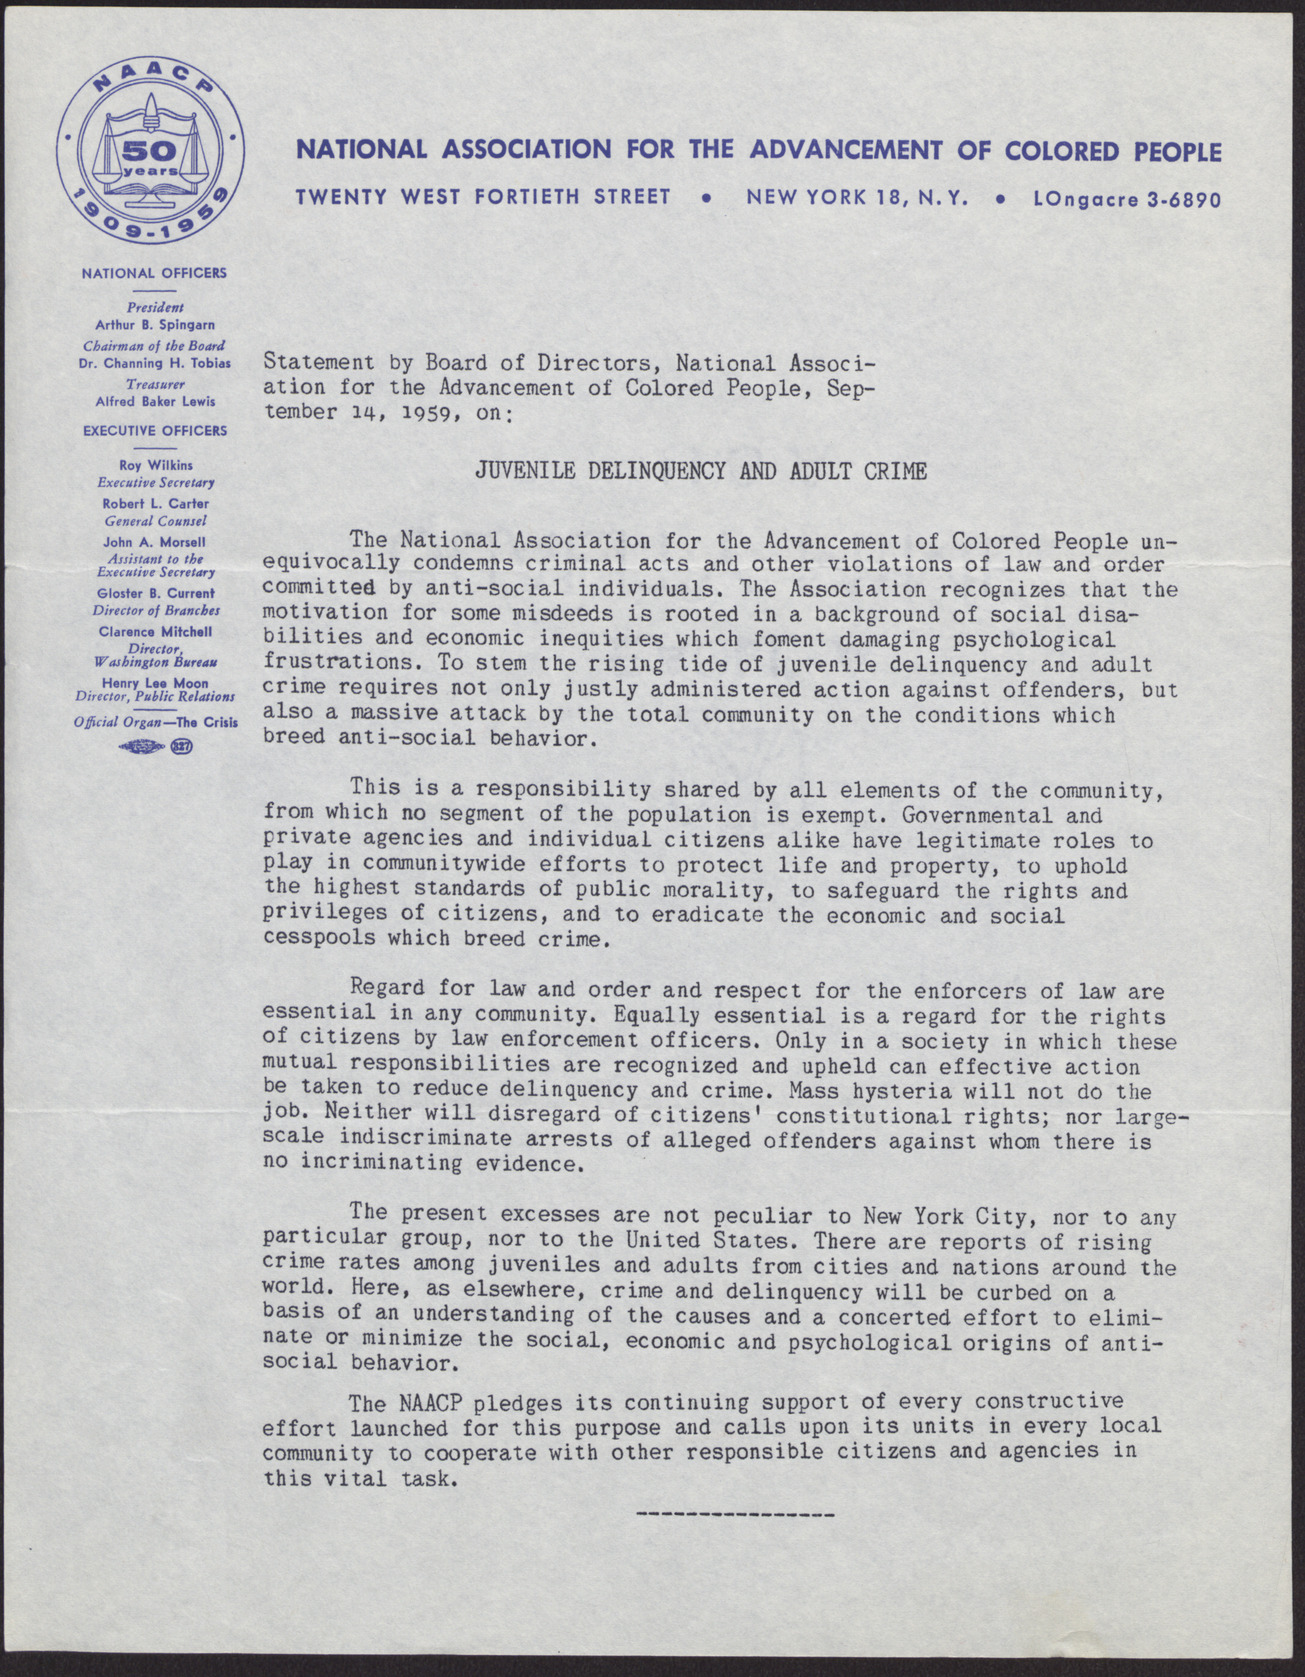 NAACP Board of Directors' Statement on Juvenile Delinquency and Adult Crime, September 14, 1959